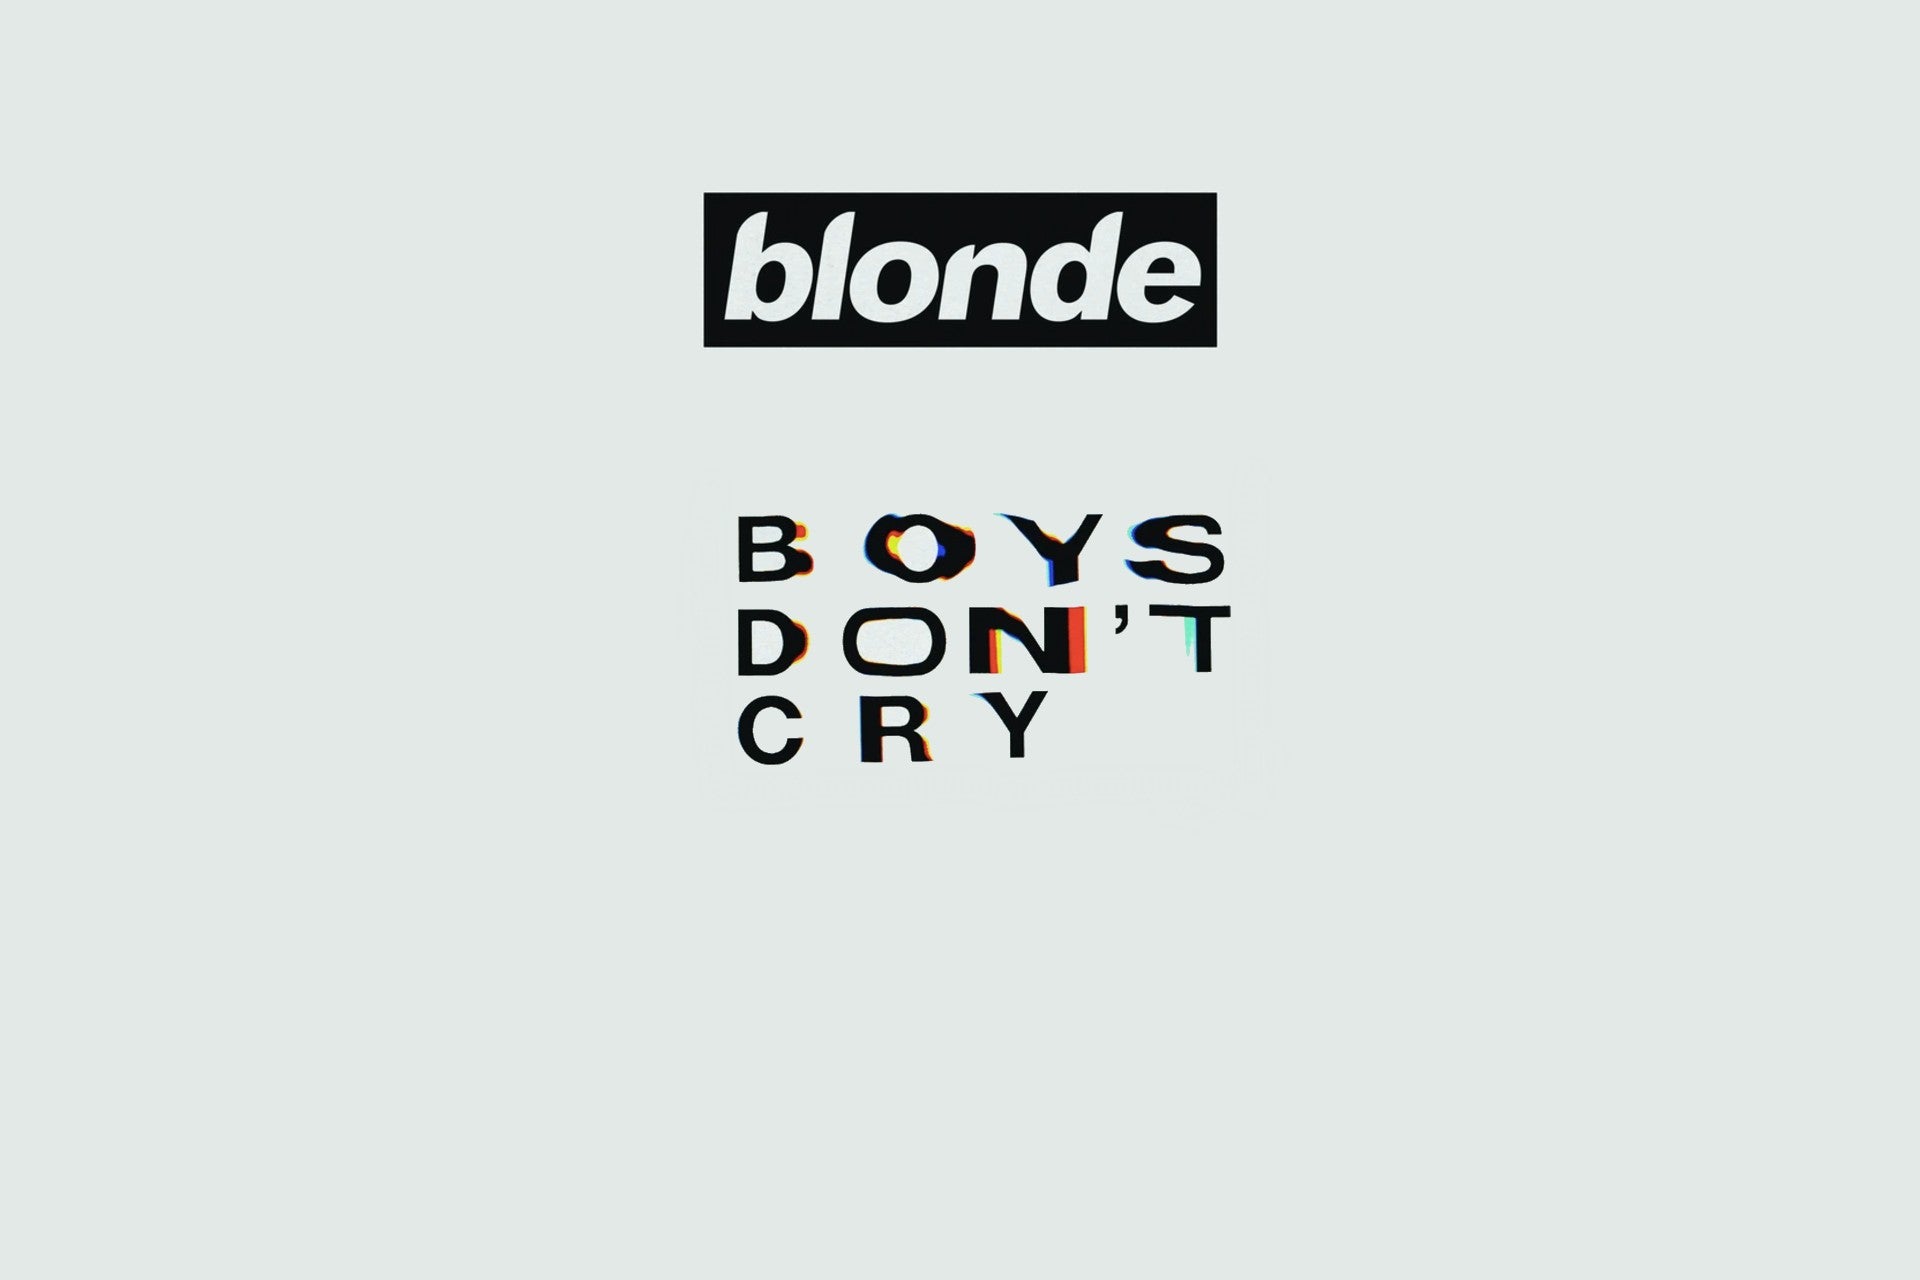 Boys don't cry wallpaper for pc, I can make a mobile version if everyone wants it!